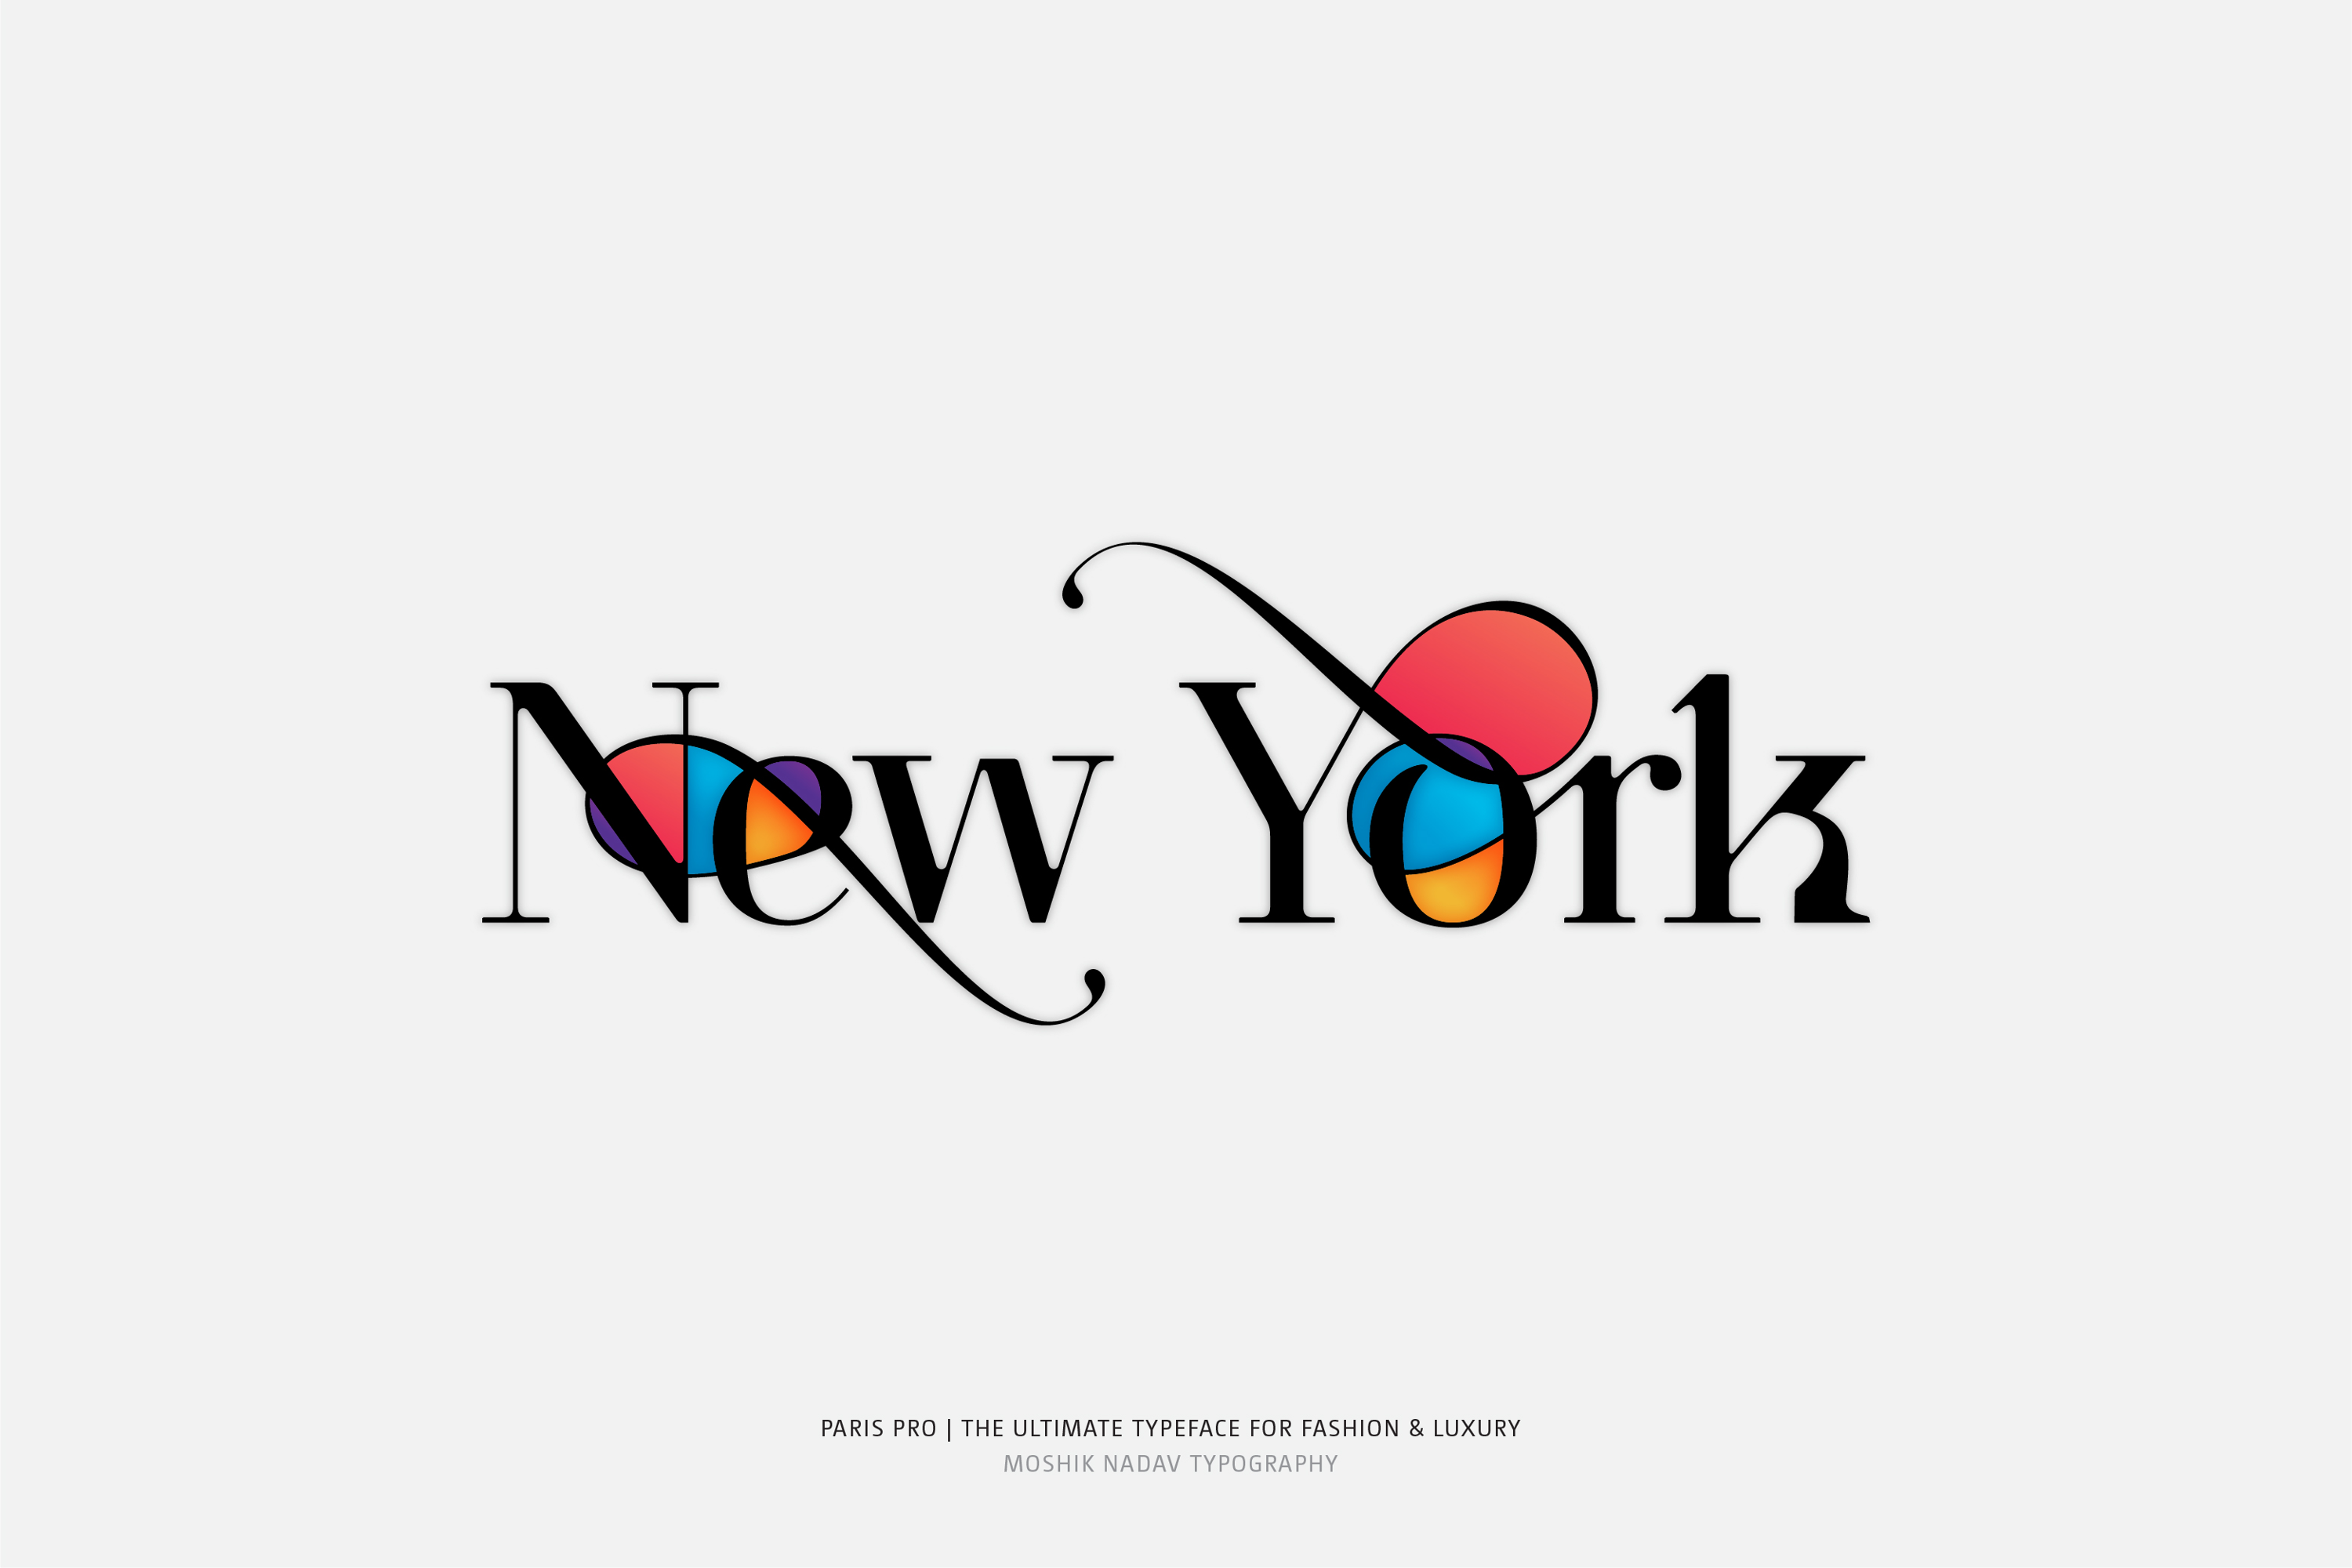 New York Typography, New York fonts, NYC Typography, Paris Pro Typeface, Moshik Nadav, Cool fonts, The ultimate fashion fonts, Vogue fonts, Elle magazine fonts, Fashion magazines fonts